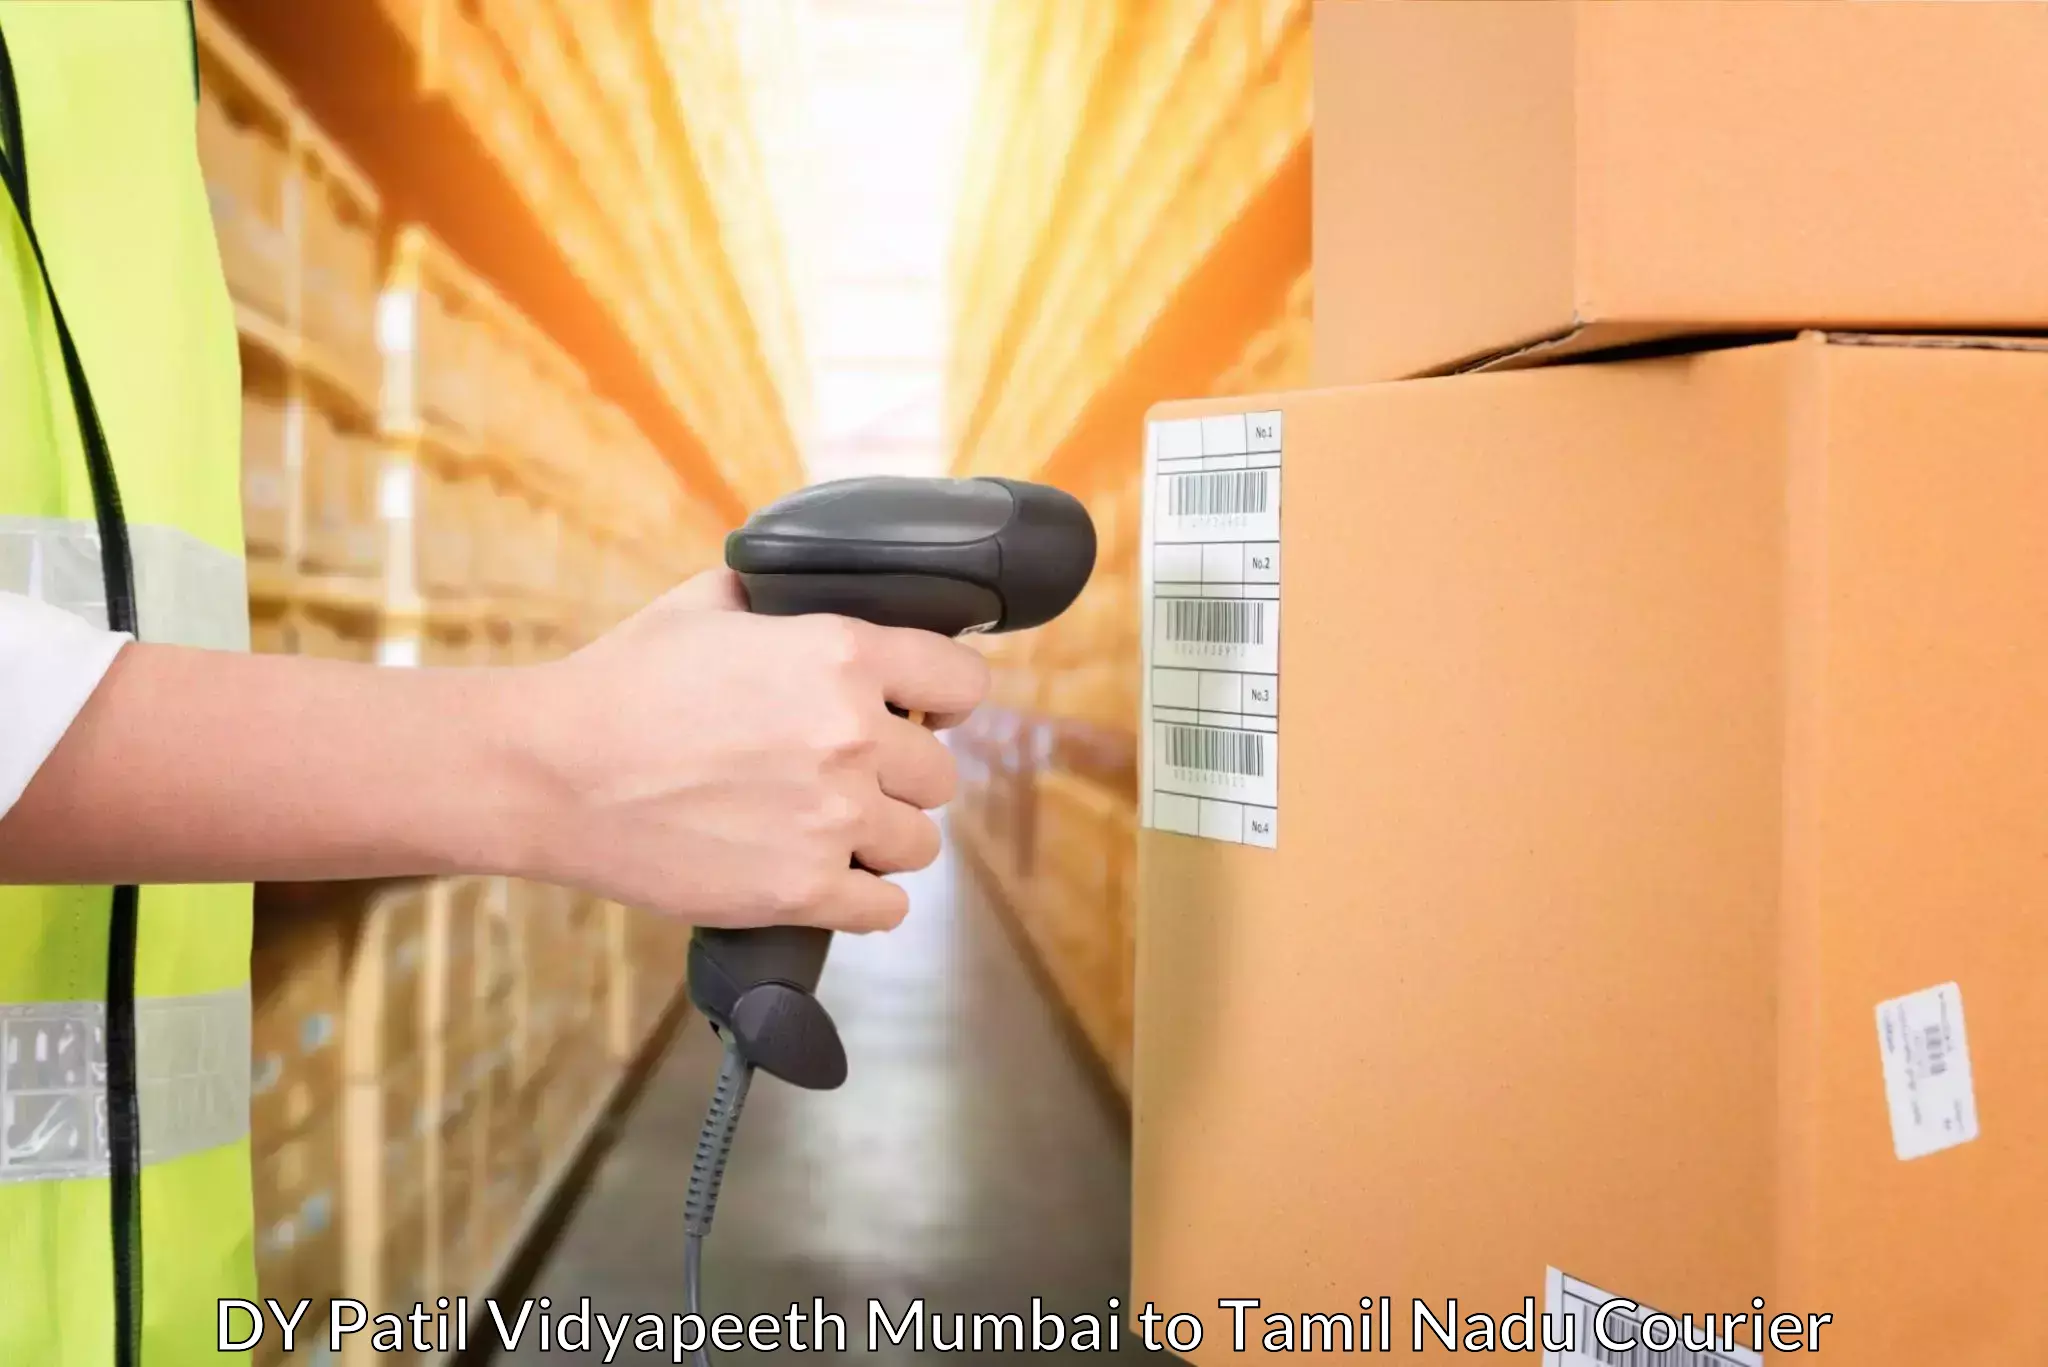 Specialized courier services DY Patil Vidyapeeth Mumbai to Velur